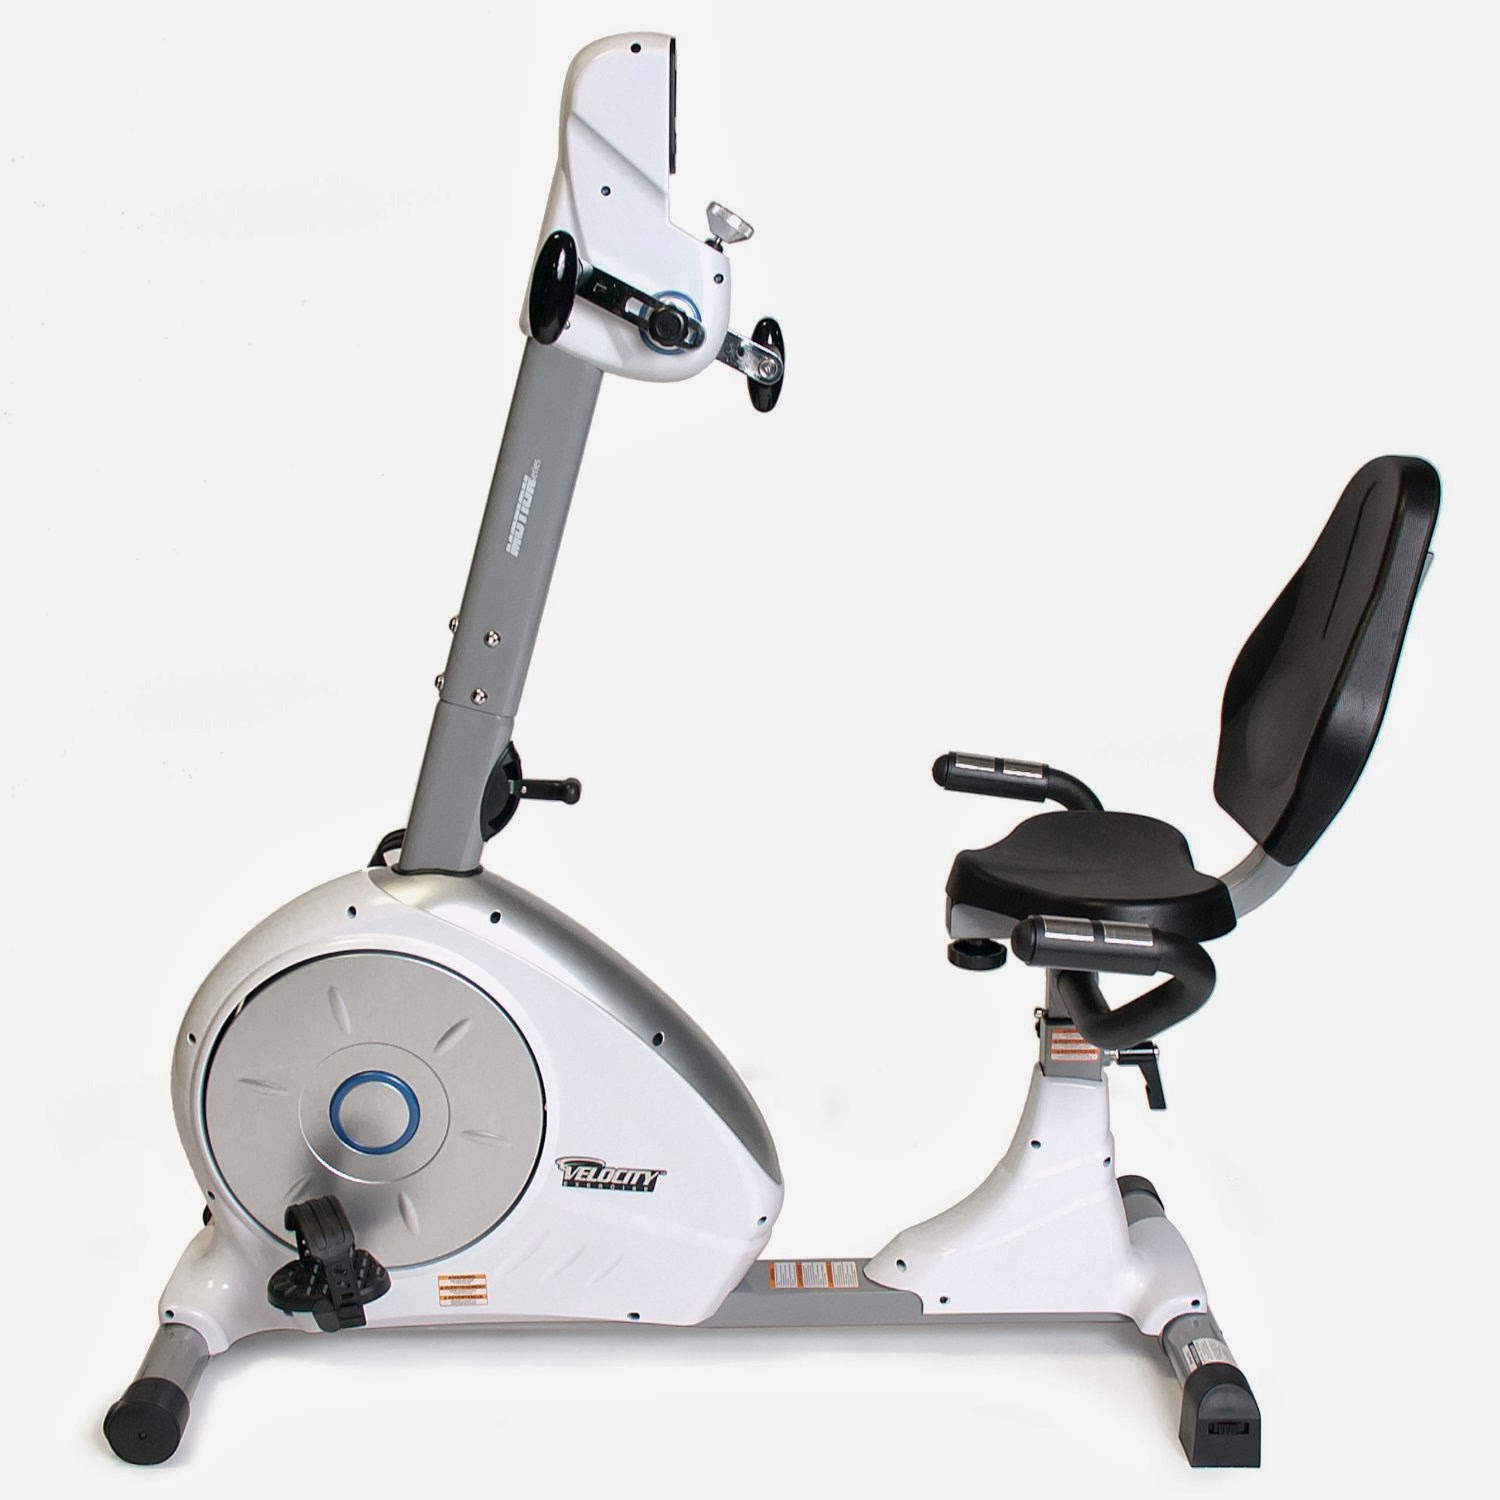 Velocity Exercise CHB-RGK862R Dual Motion Recumbent Bike, review of features